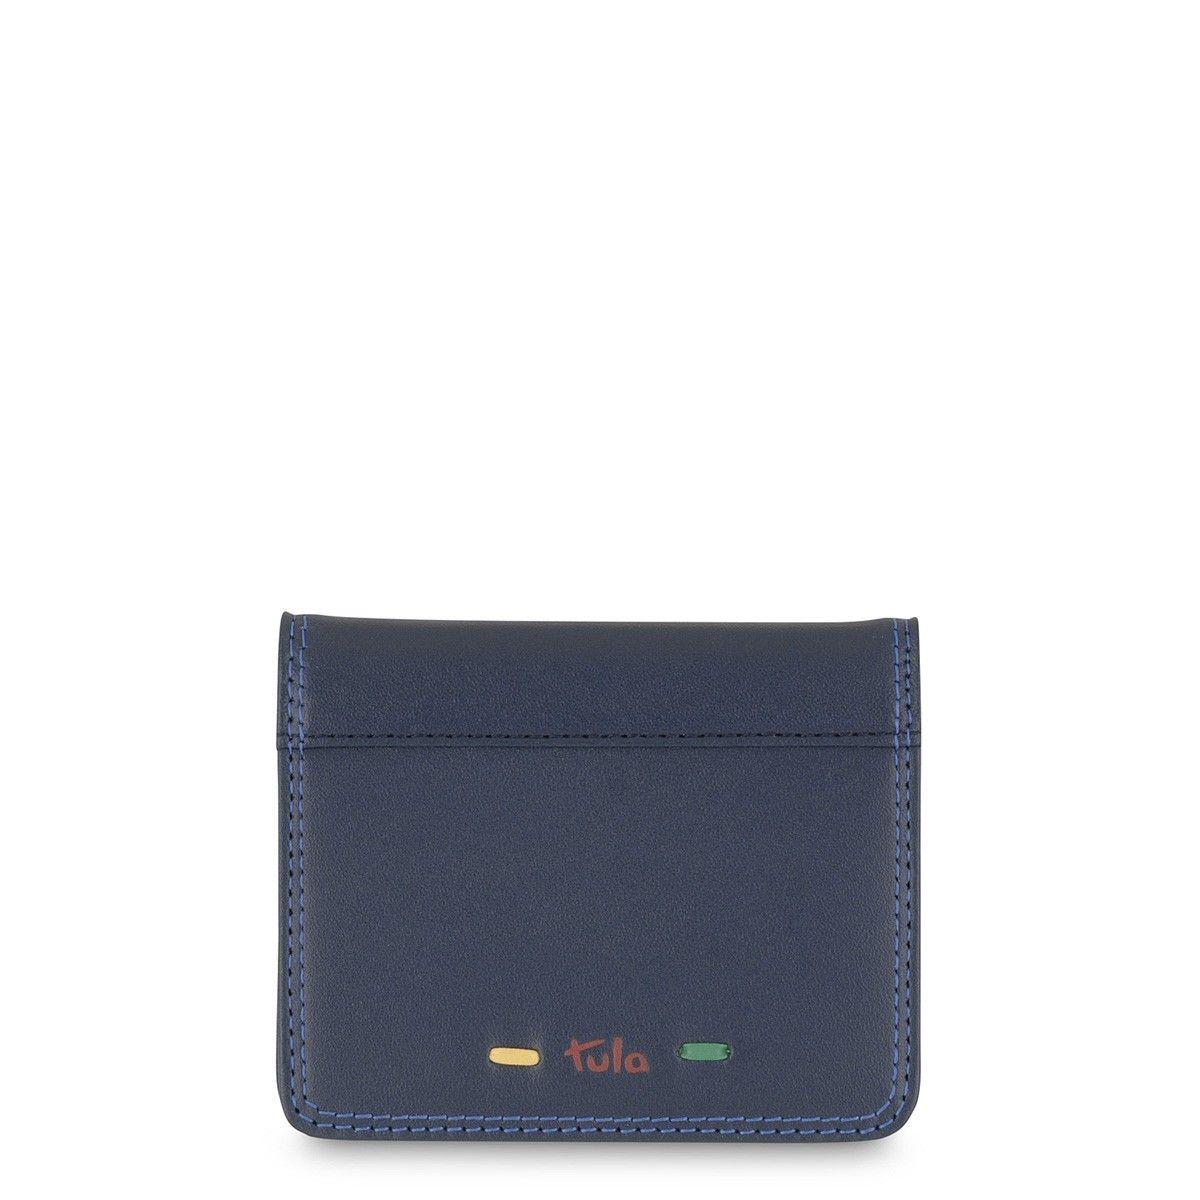 Small Credit Card Logo - Violet Small Creditcard Holder > Buy Credit Card Holders Online at